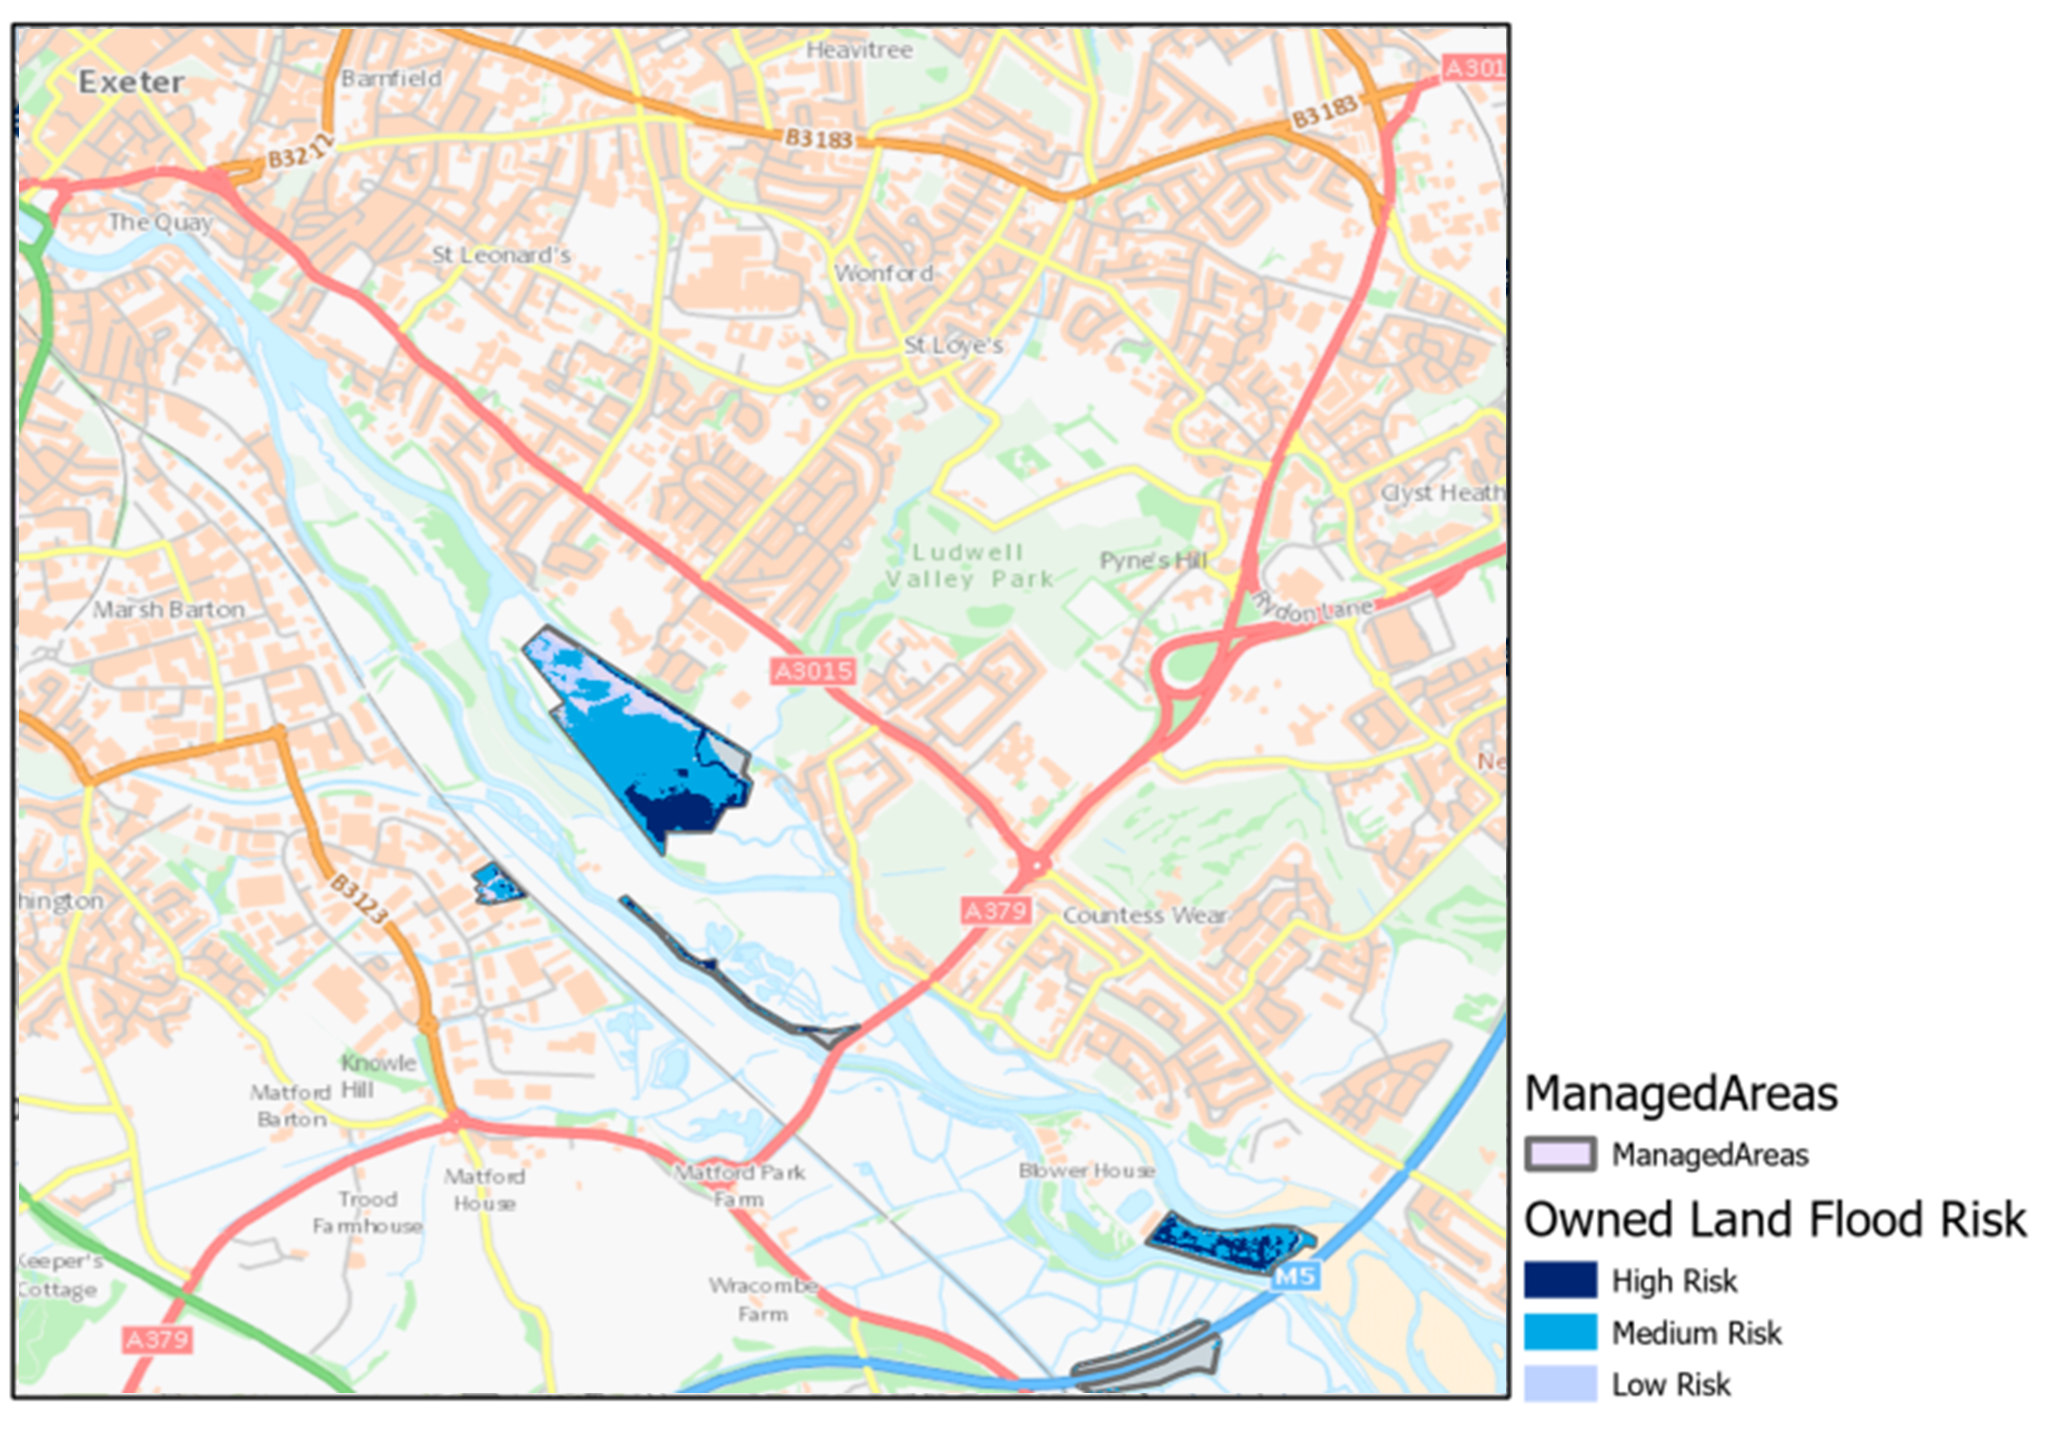 JBA flood risk map of managed areas